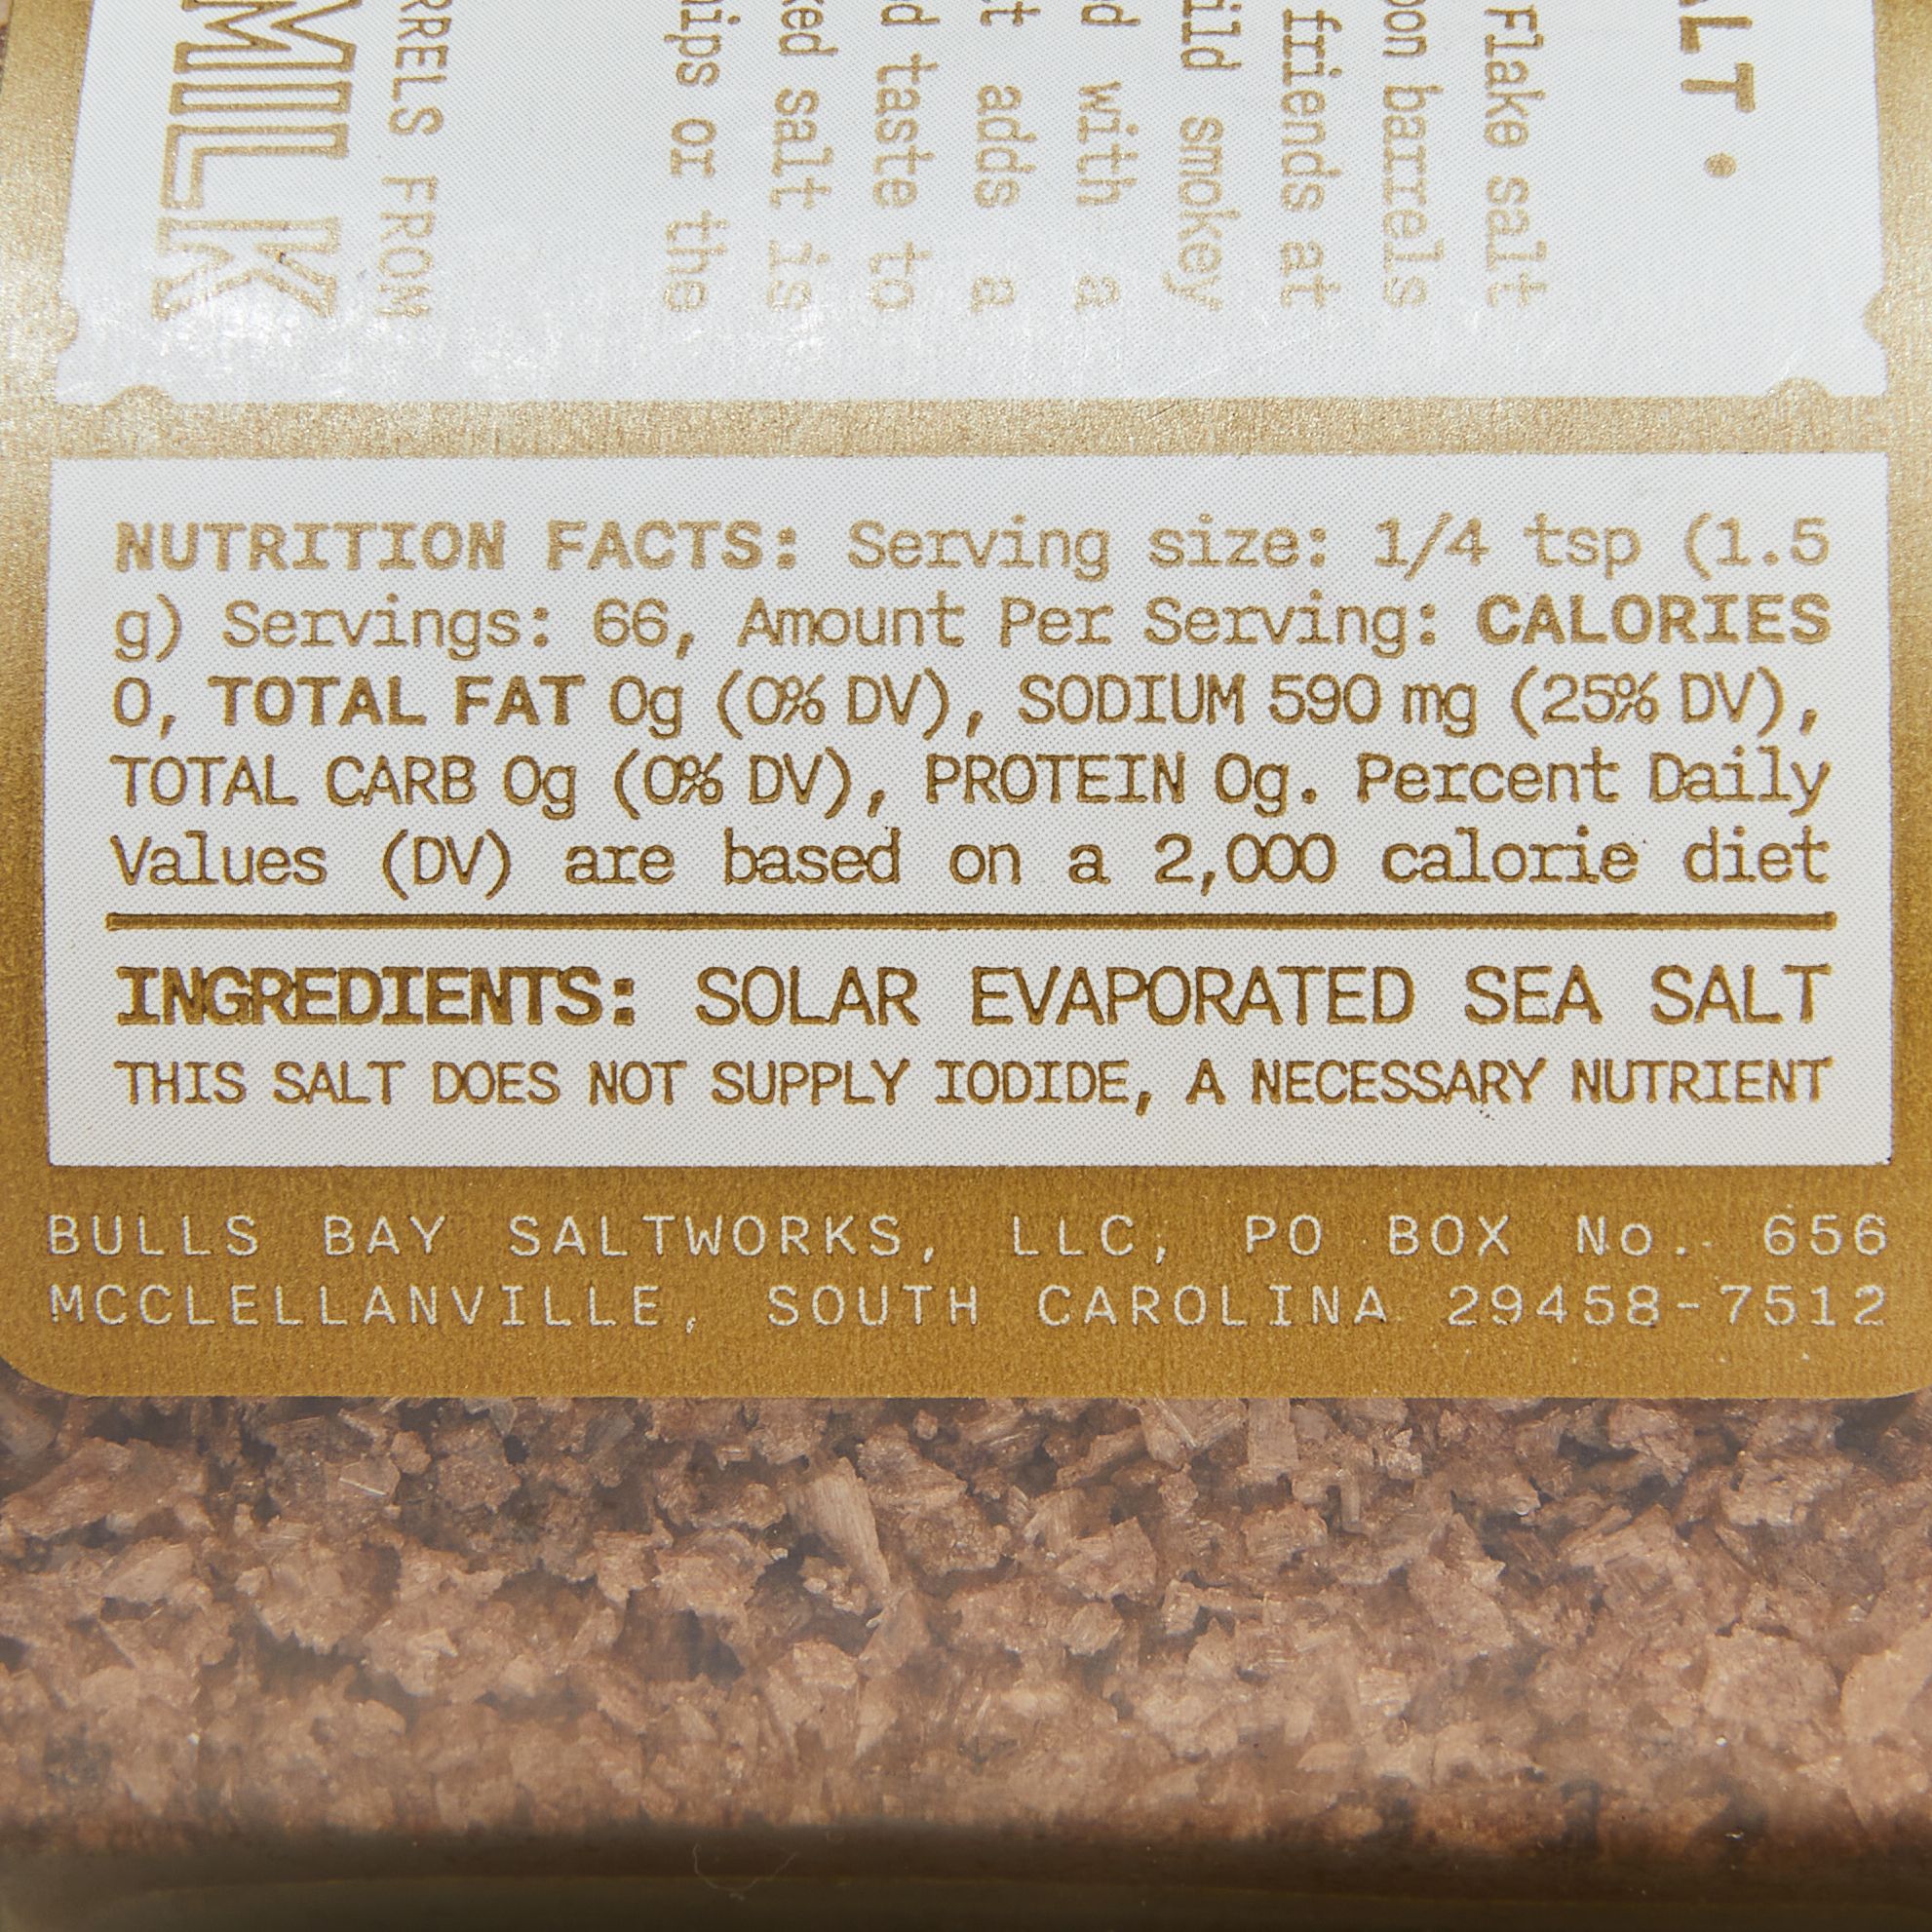 A label that shows nutritional information and ingredients contains in the jar of smoked flake salt